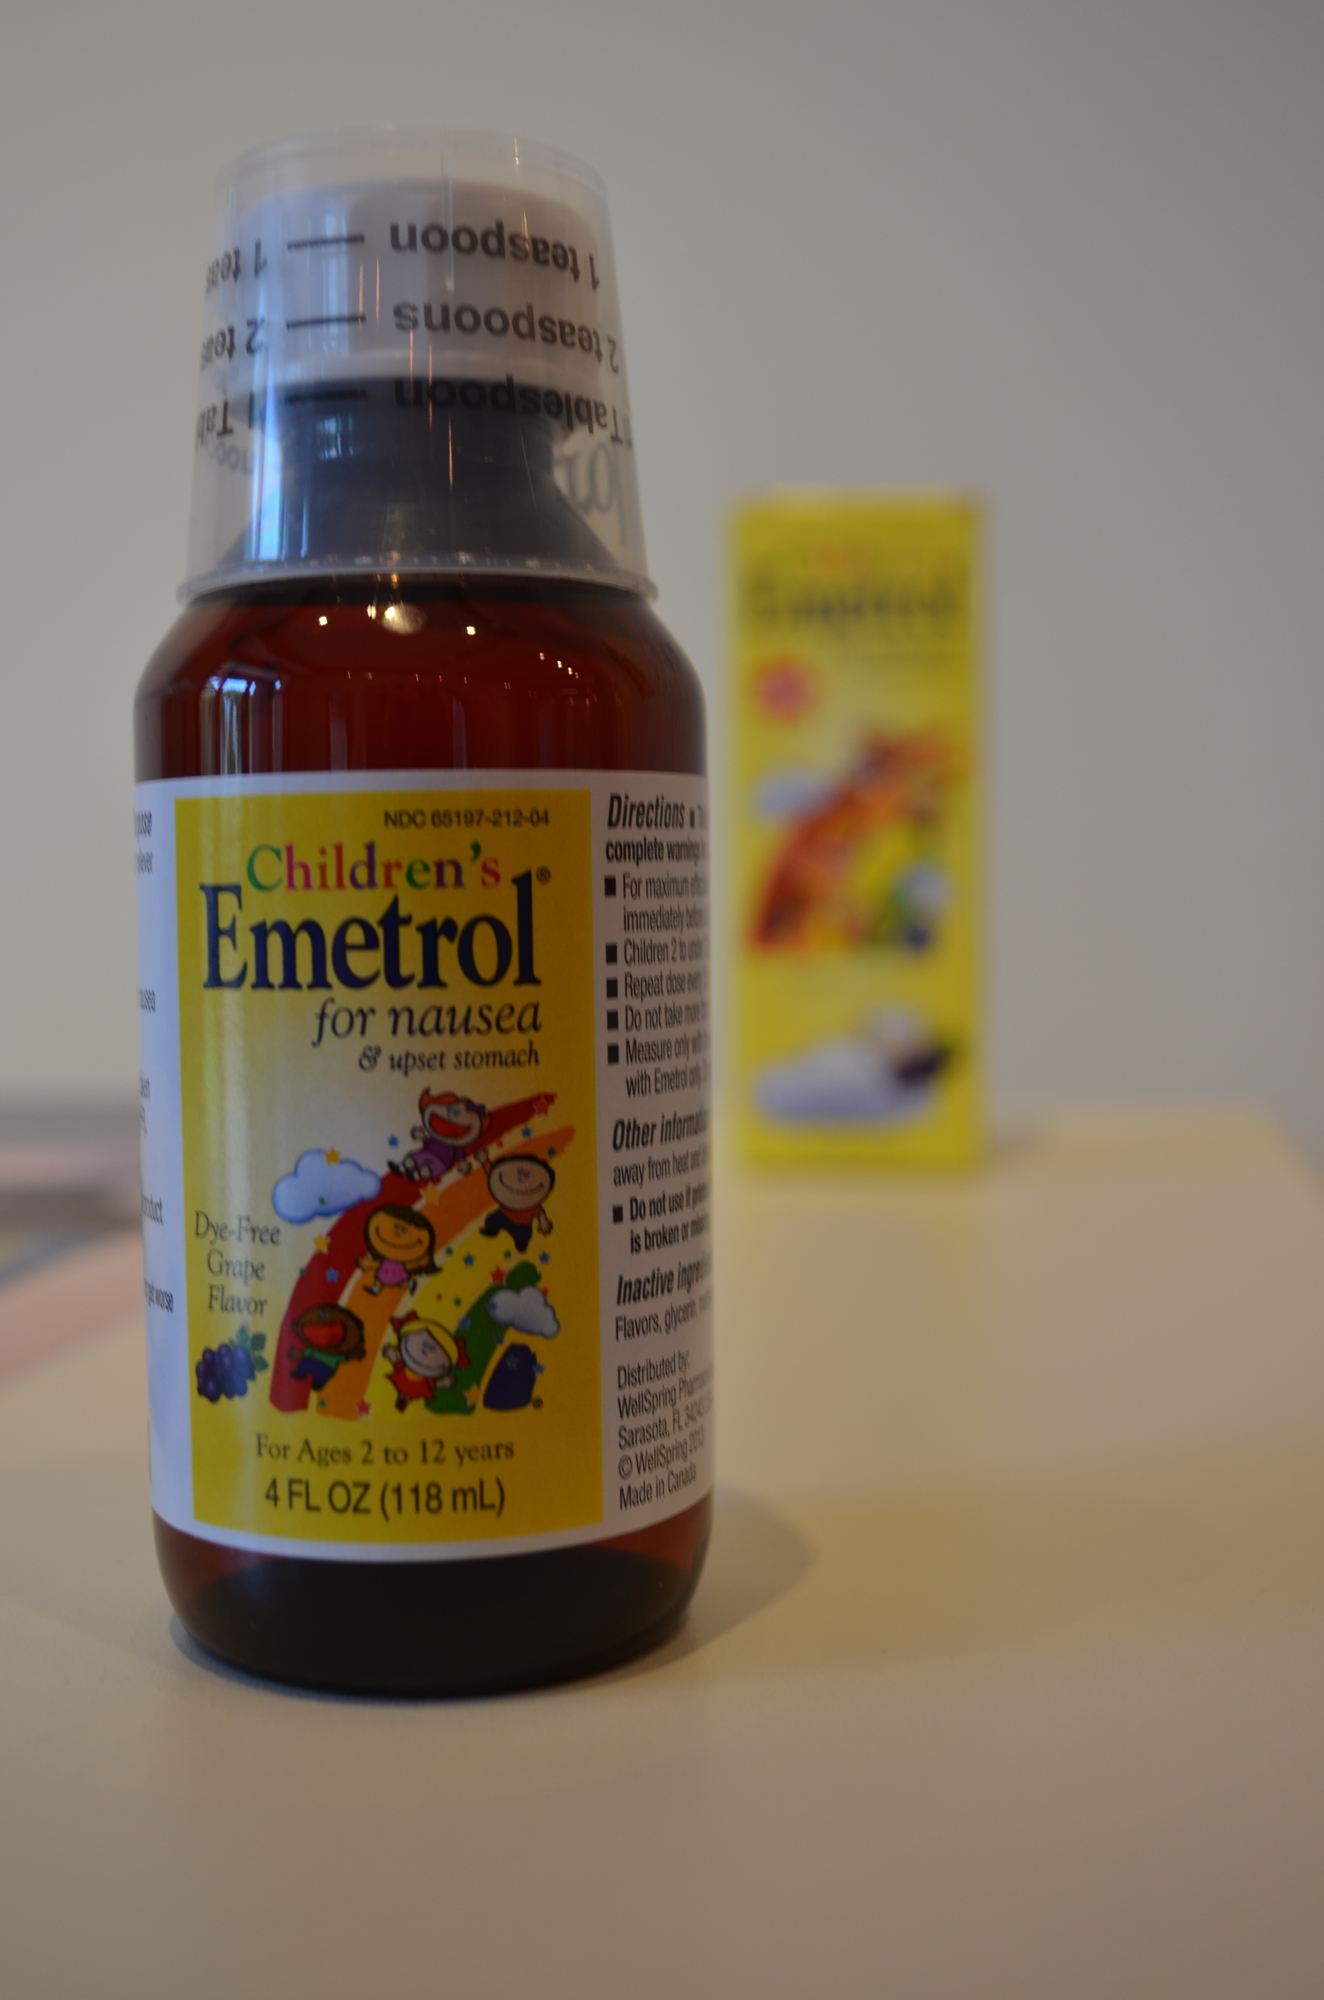 Nuevo Advertising Group worked with Wellspring Pharmaceutical to refresh the packaging of Children’s Emetrol, an anti-nausea medication, in order to create a more vibrant, kid-friendly look.